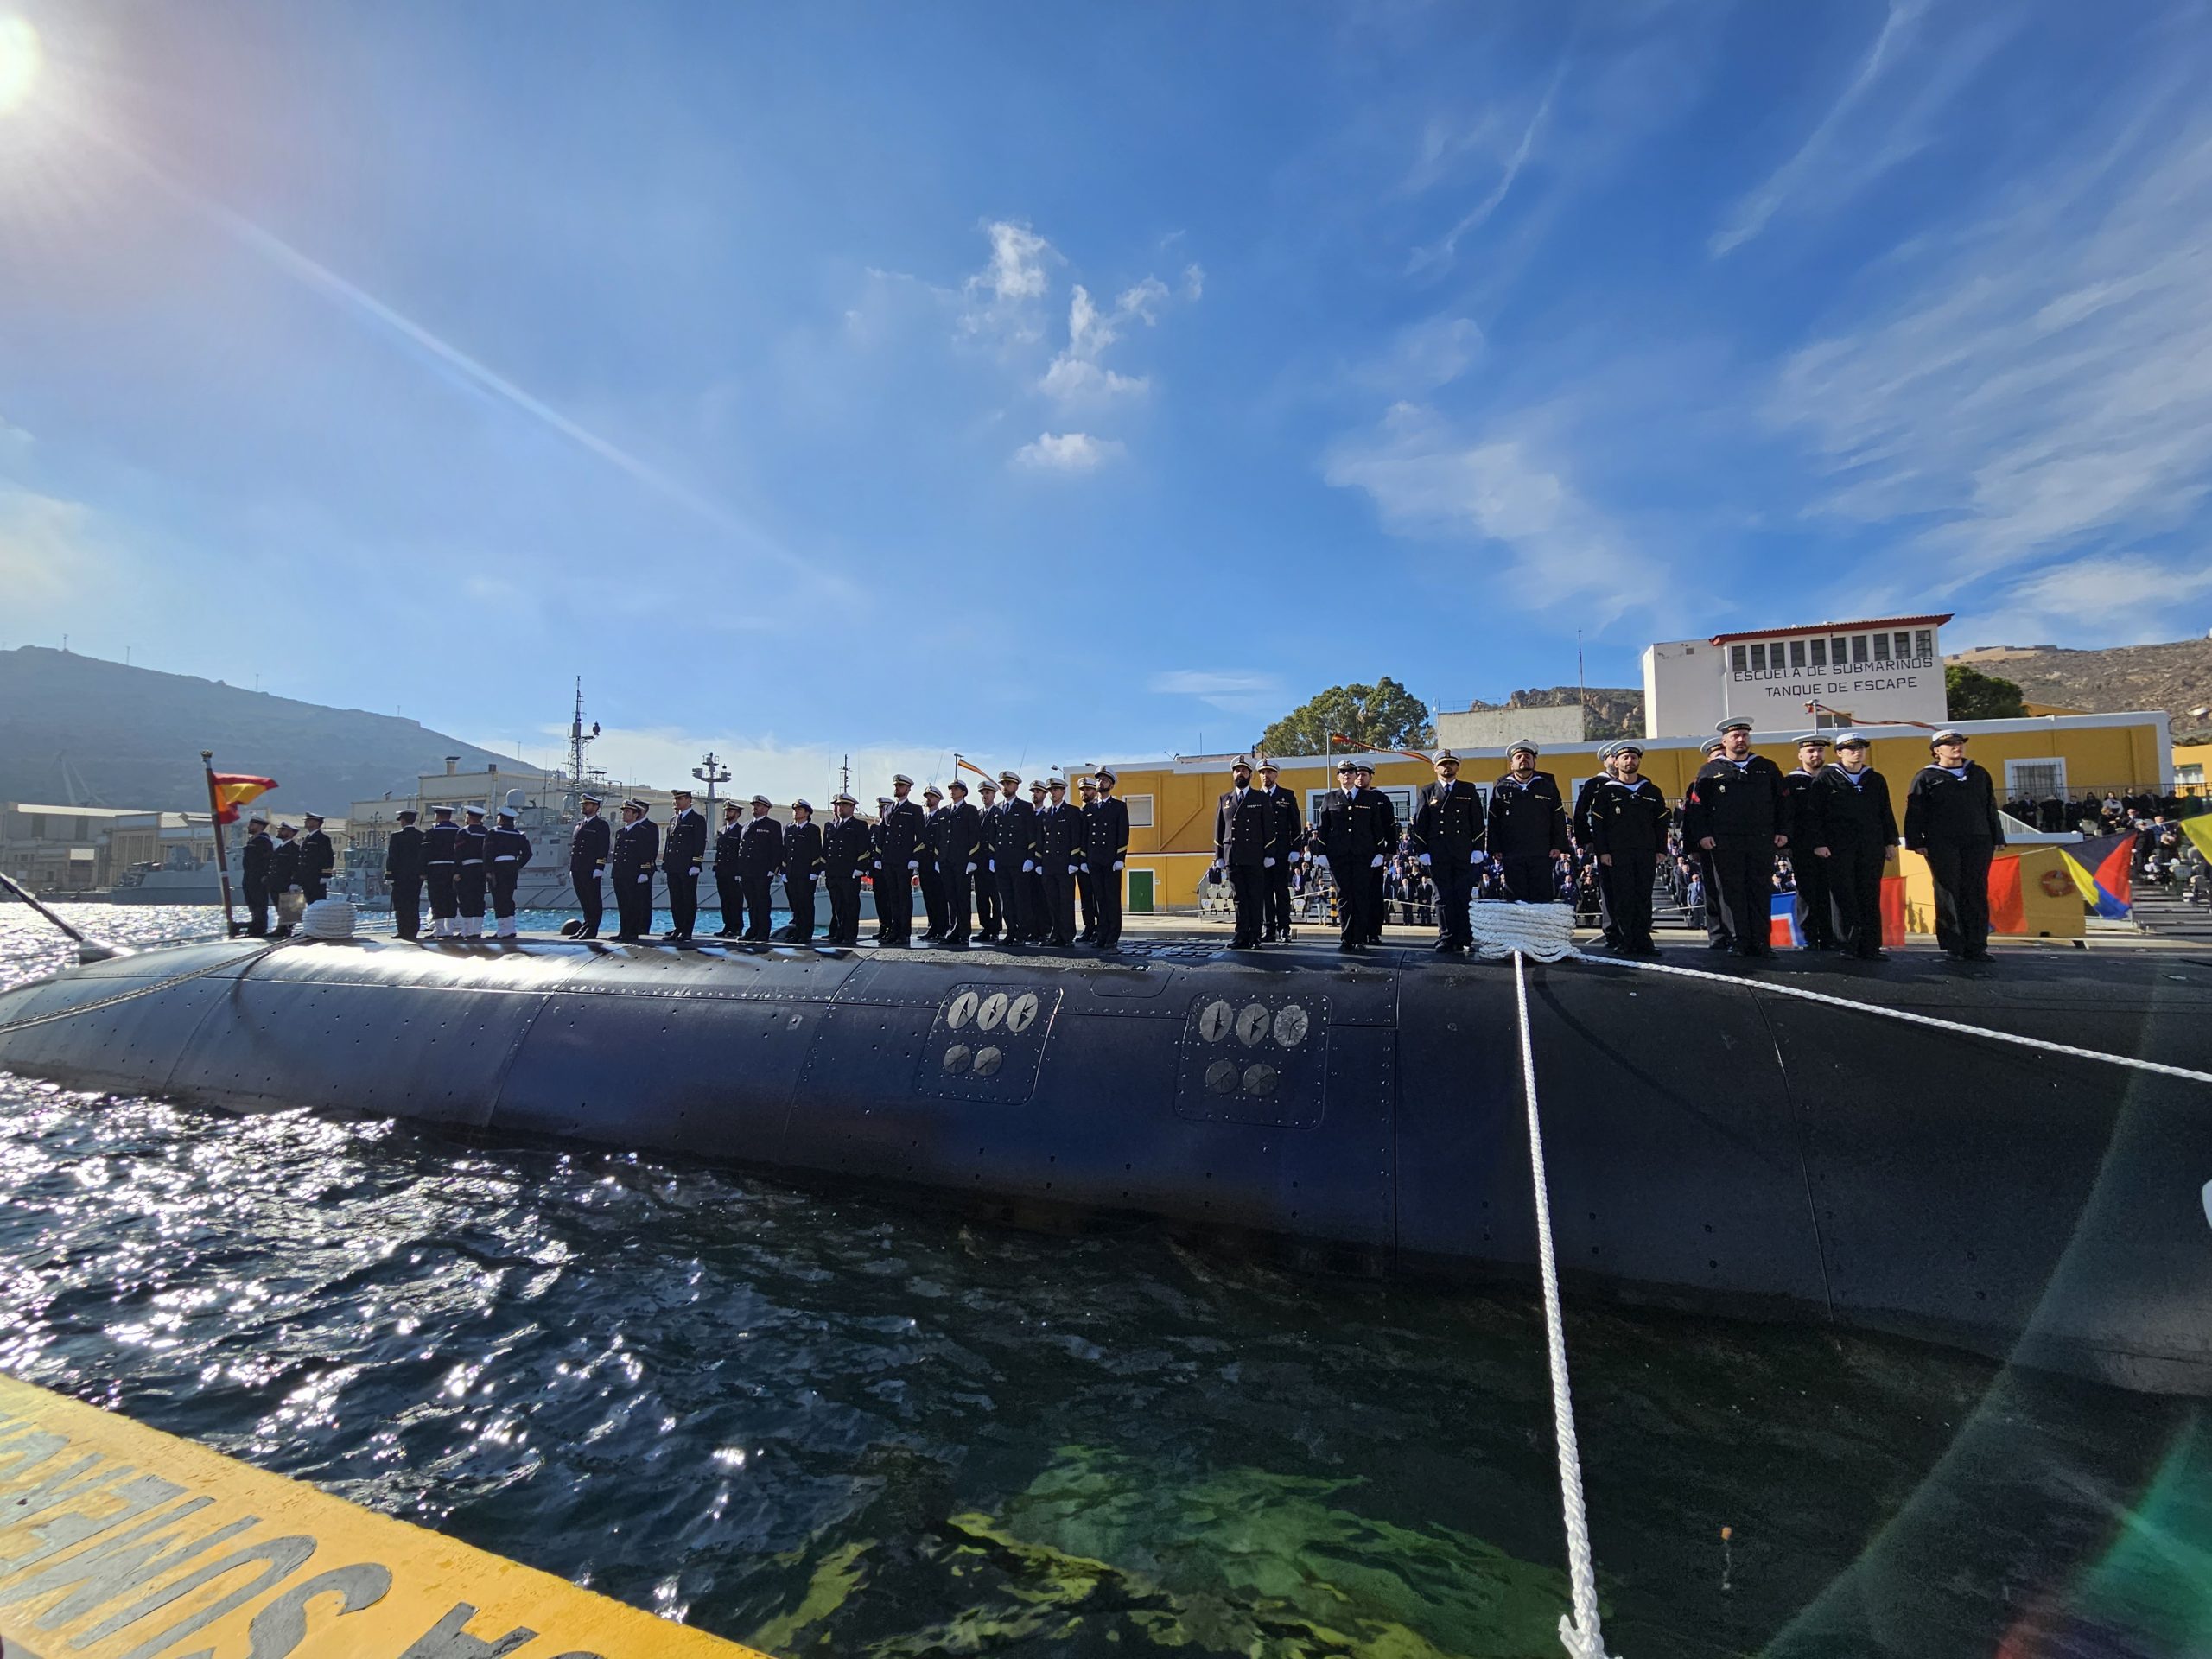 S-81 'Isaac Peral' submarine commissioned by the Spanish Navy